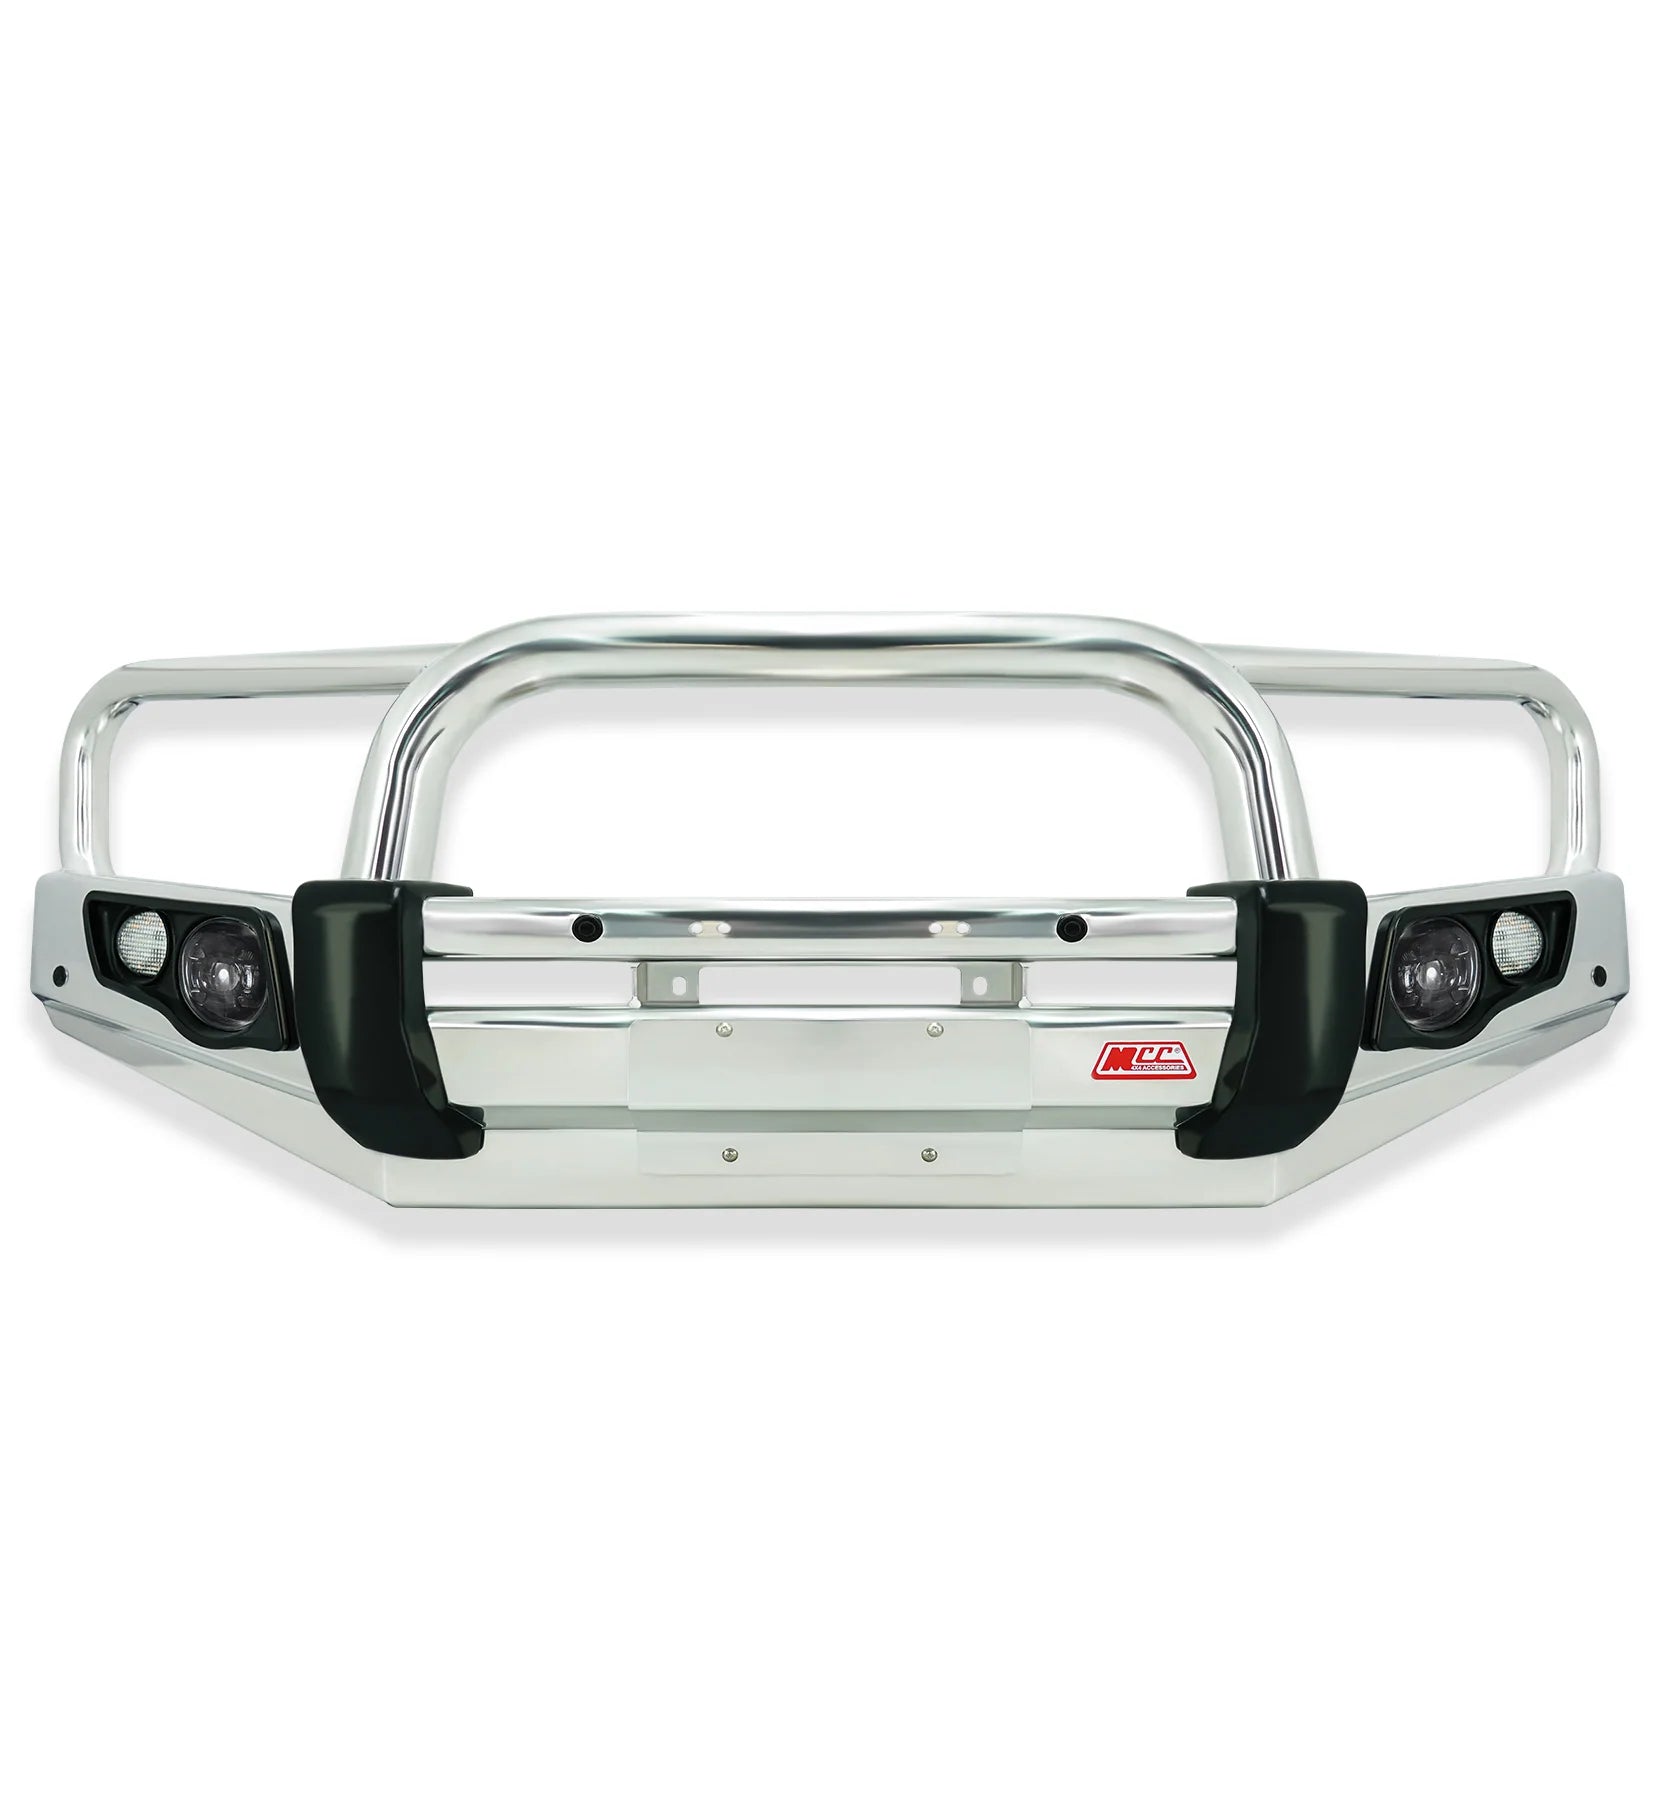 Pajero Ns Nx Nt Nw 06-20 707-01a Alloy Falcon Triple Loop+fog+up+bracket Non-winch